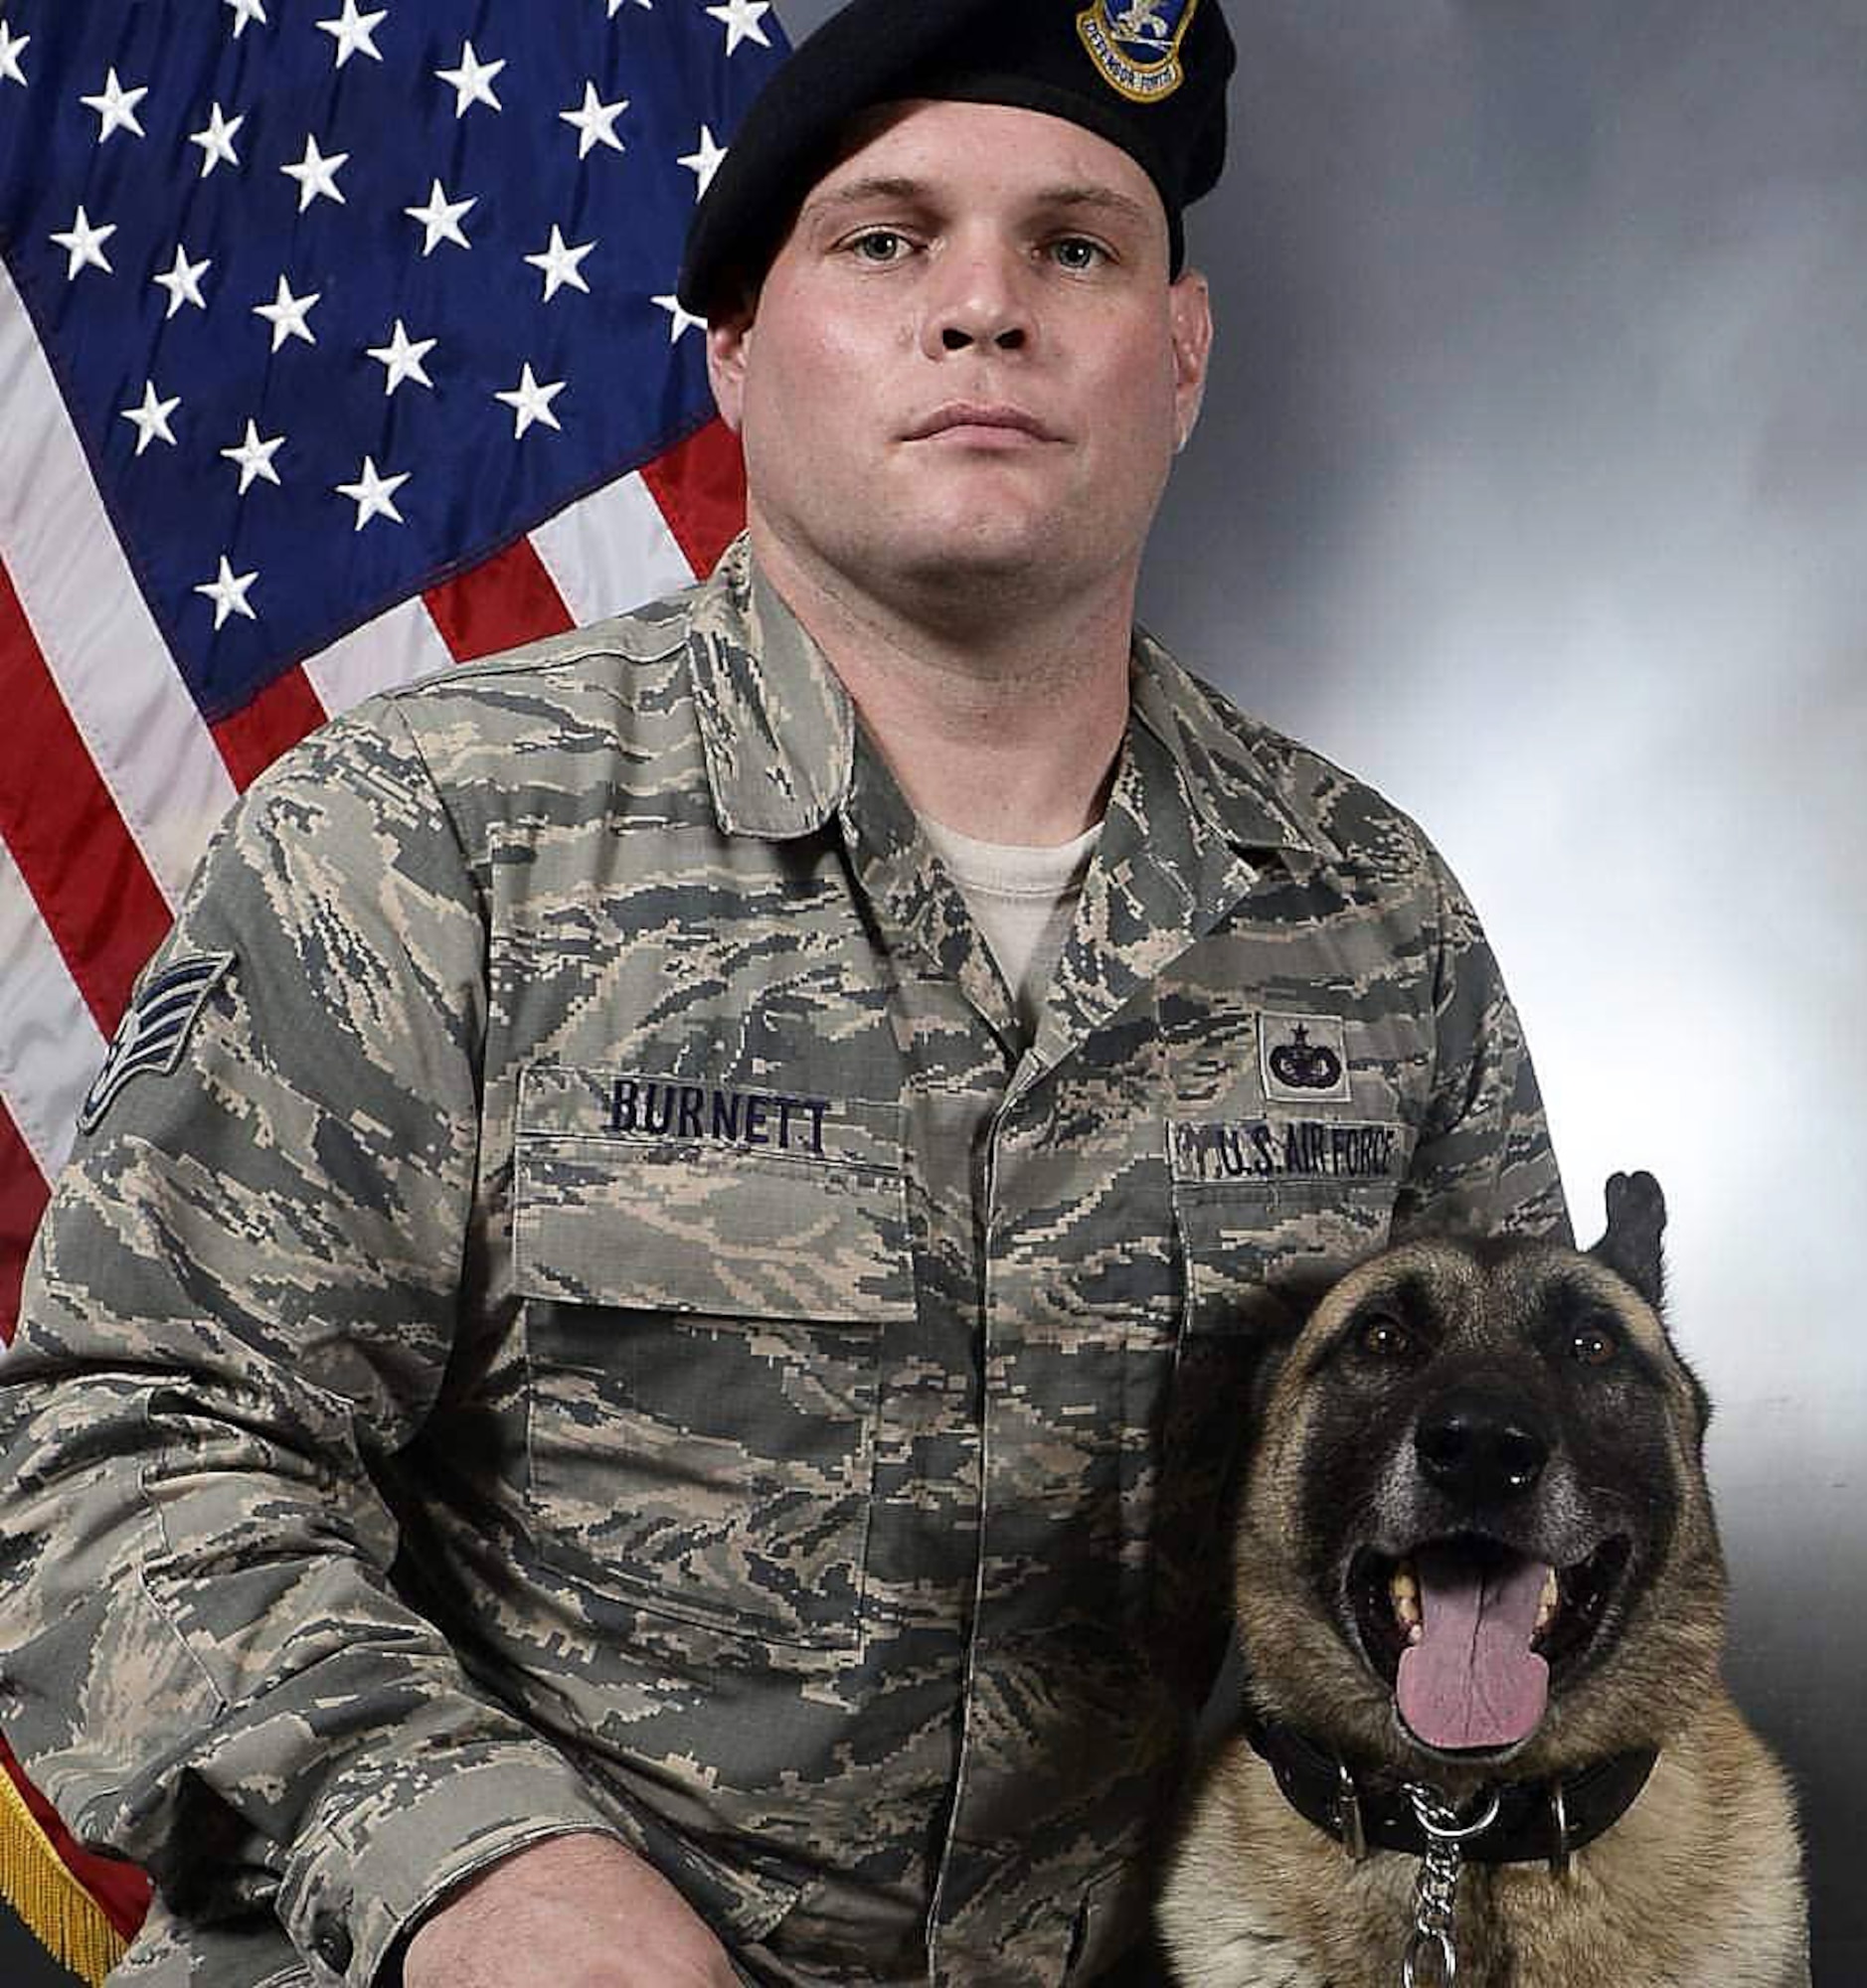 Josh Burnett, a former U.S. Air Force Staff Sgt. and 6th Security Forces military working dog (MWD) handler, poses for a portrait with his partner Jecky MWD, June 22, 2019, at MacDill Air Force Base, Fla.  Burnett served in the Air Force for a total of 15 years, and worked as a MWD handler for 11 years. (Courtesy photo)